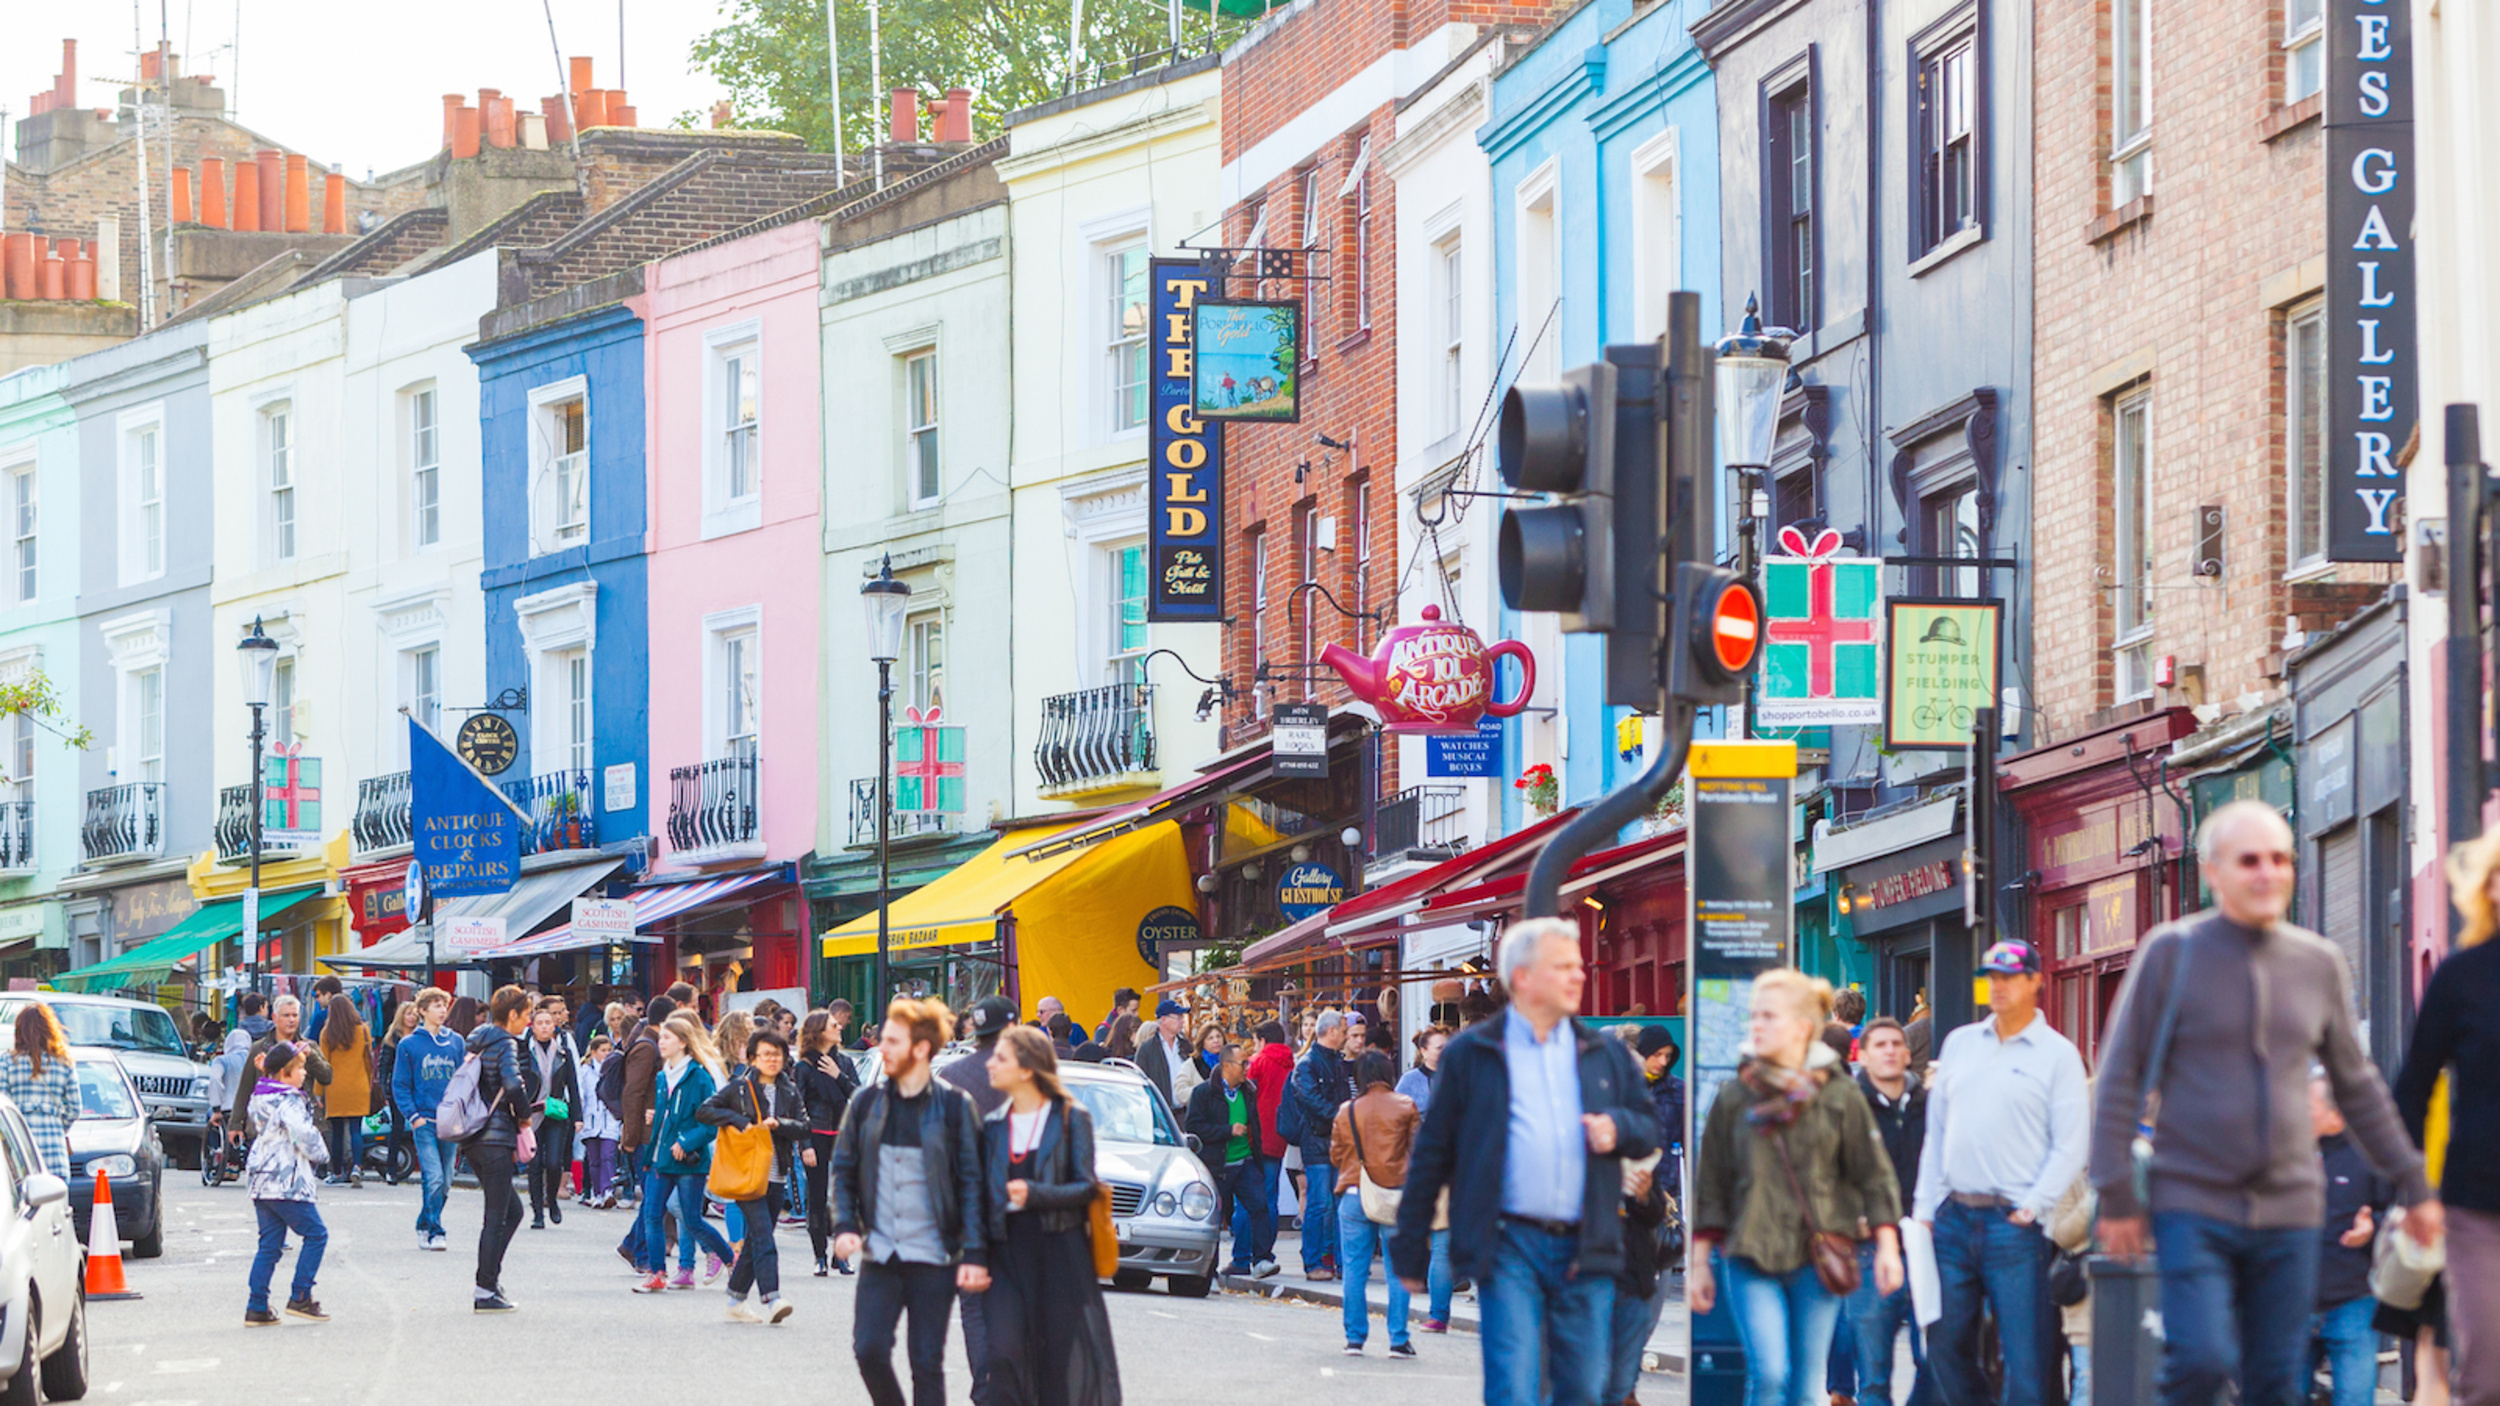 <p><span><span>I don't know what's more famous: Notting Hill or <em>Notting Hill</em>? Both the movie and the place attract loads of tourists, though it's the market on Portobello Road that is more famous than both combined. </span></span></p><p>You may also like: <a href='https://www.yardbarker.com/lifestyle/articles/21_creative_camping_food_and_drink_hacks/s1__35866145'>21 creative camping food and drink hacks</a></p>